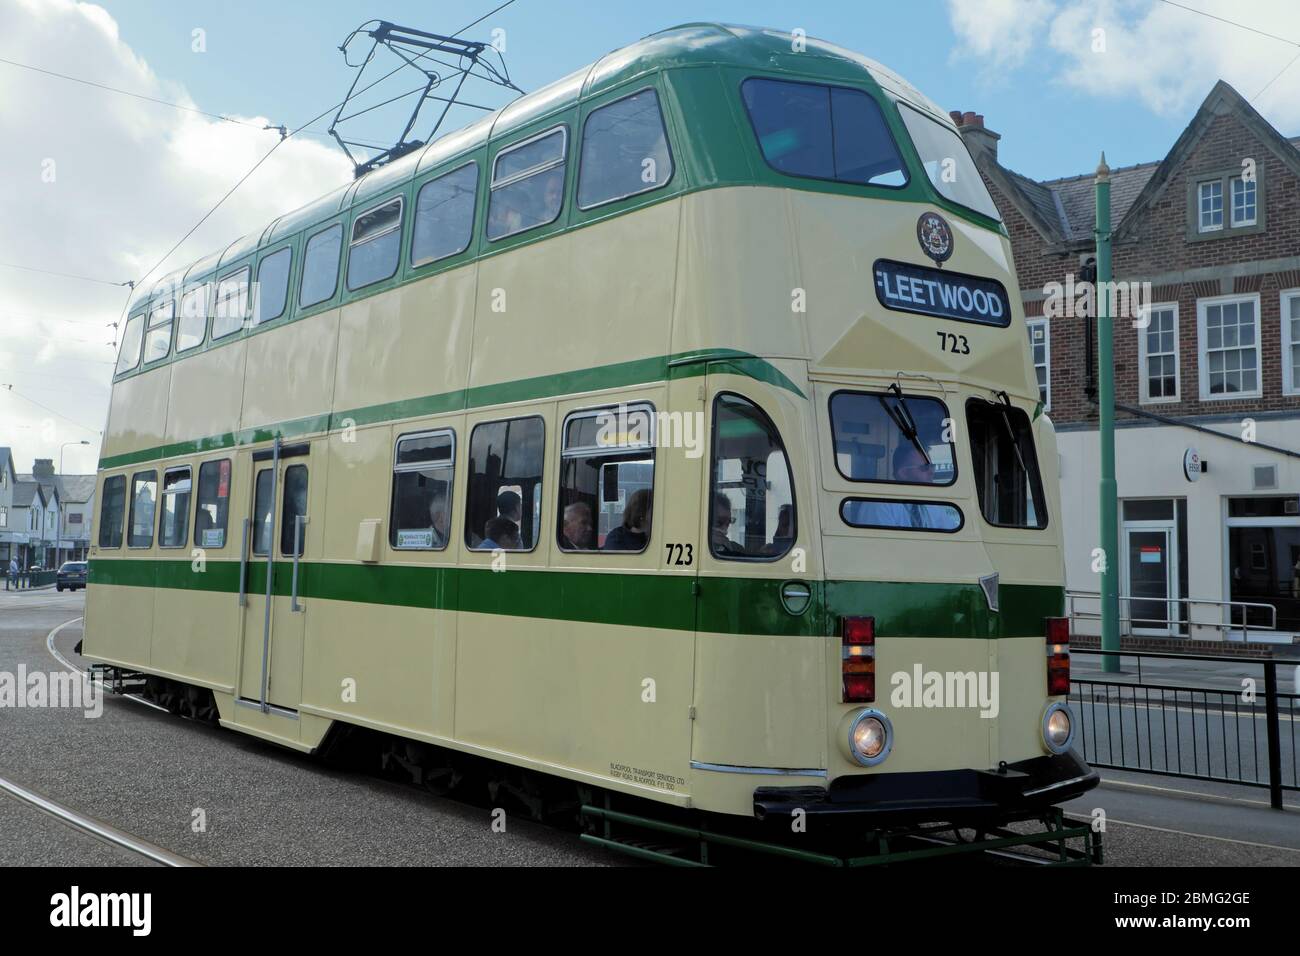 Car 723 of the Blackpool Transport (BTS) stopped at Cleveleys on route to Fleetwood Lancashire England UK Stock Photo